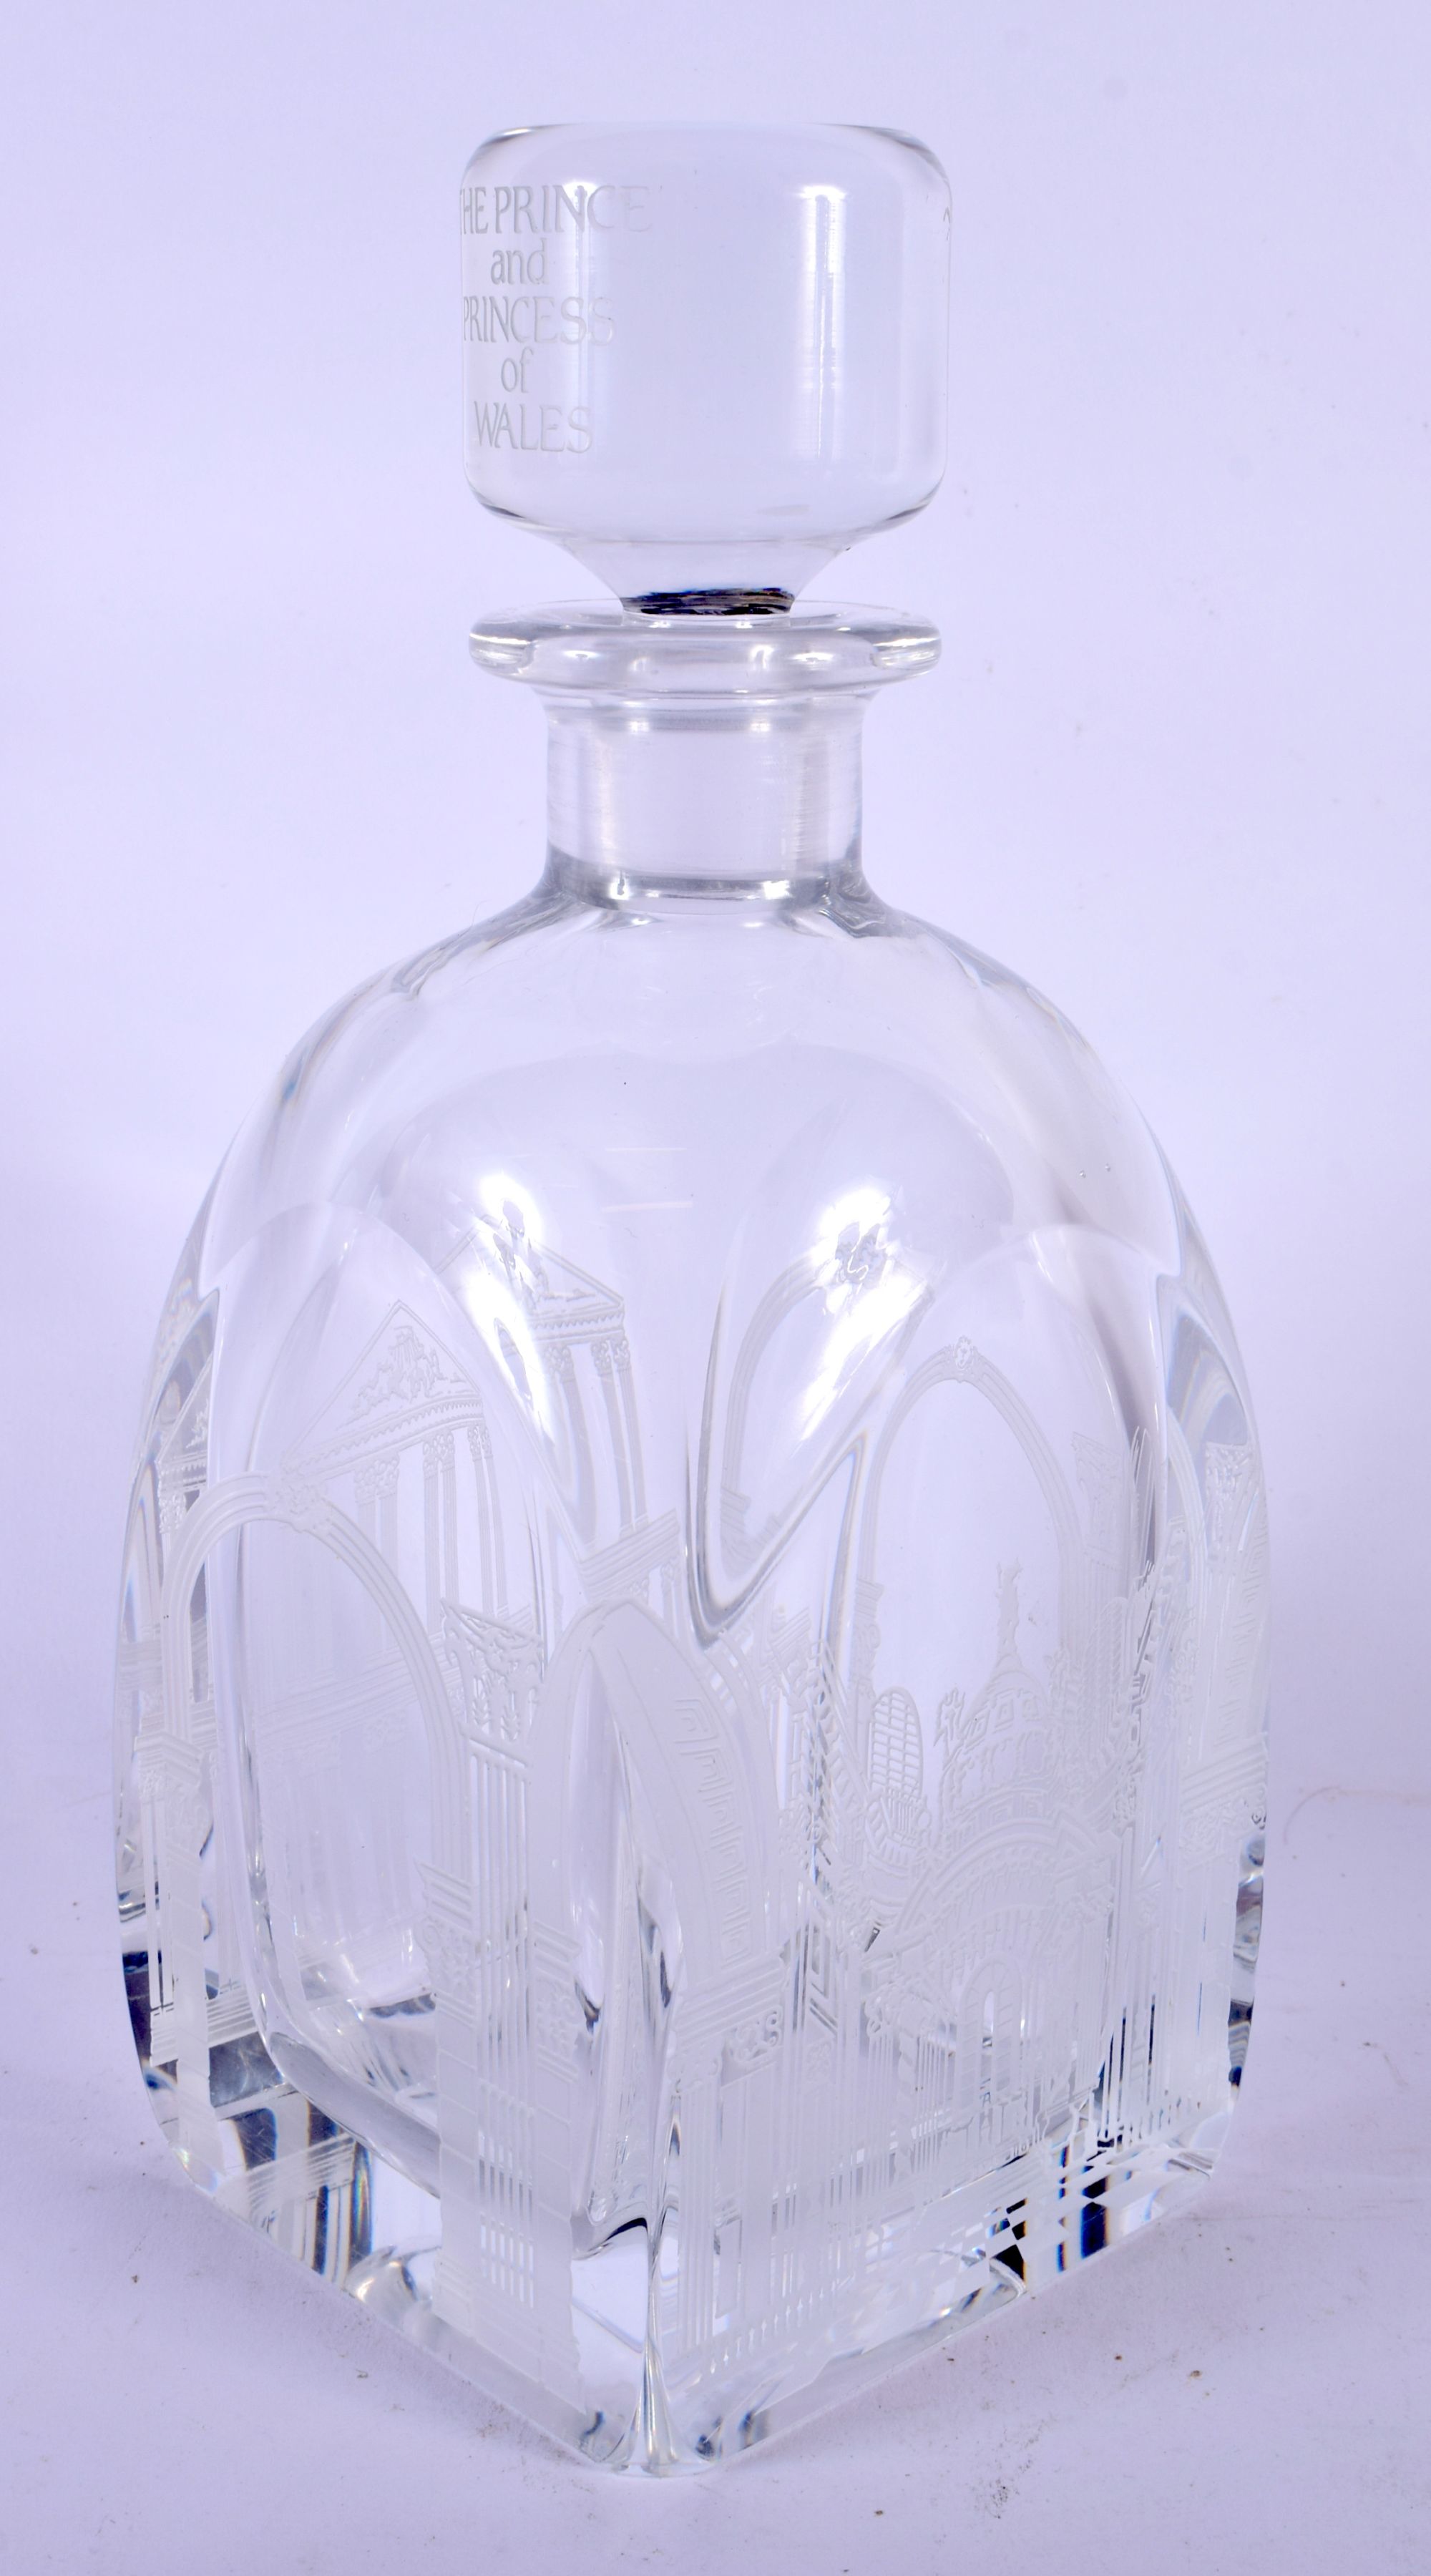 AN ORREFORS PRINCESS OF WALES GLASS DECANTER. 24 cm high.